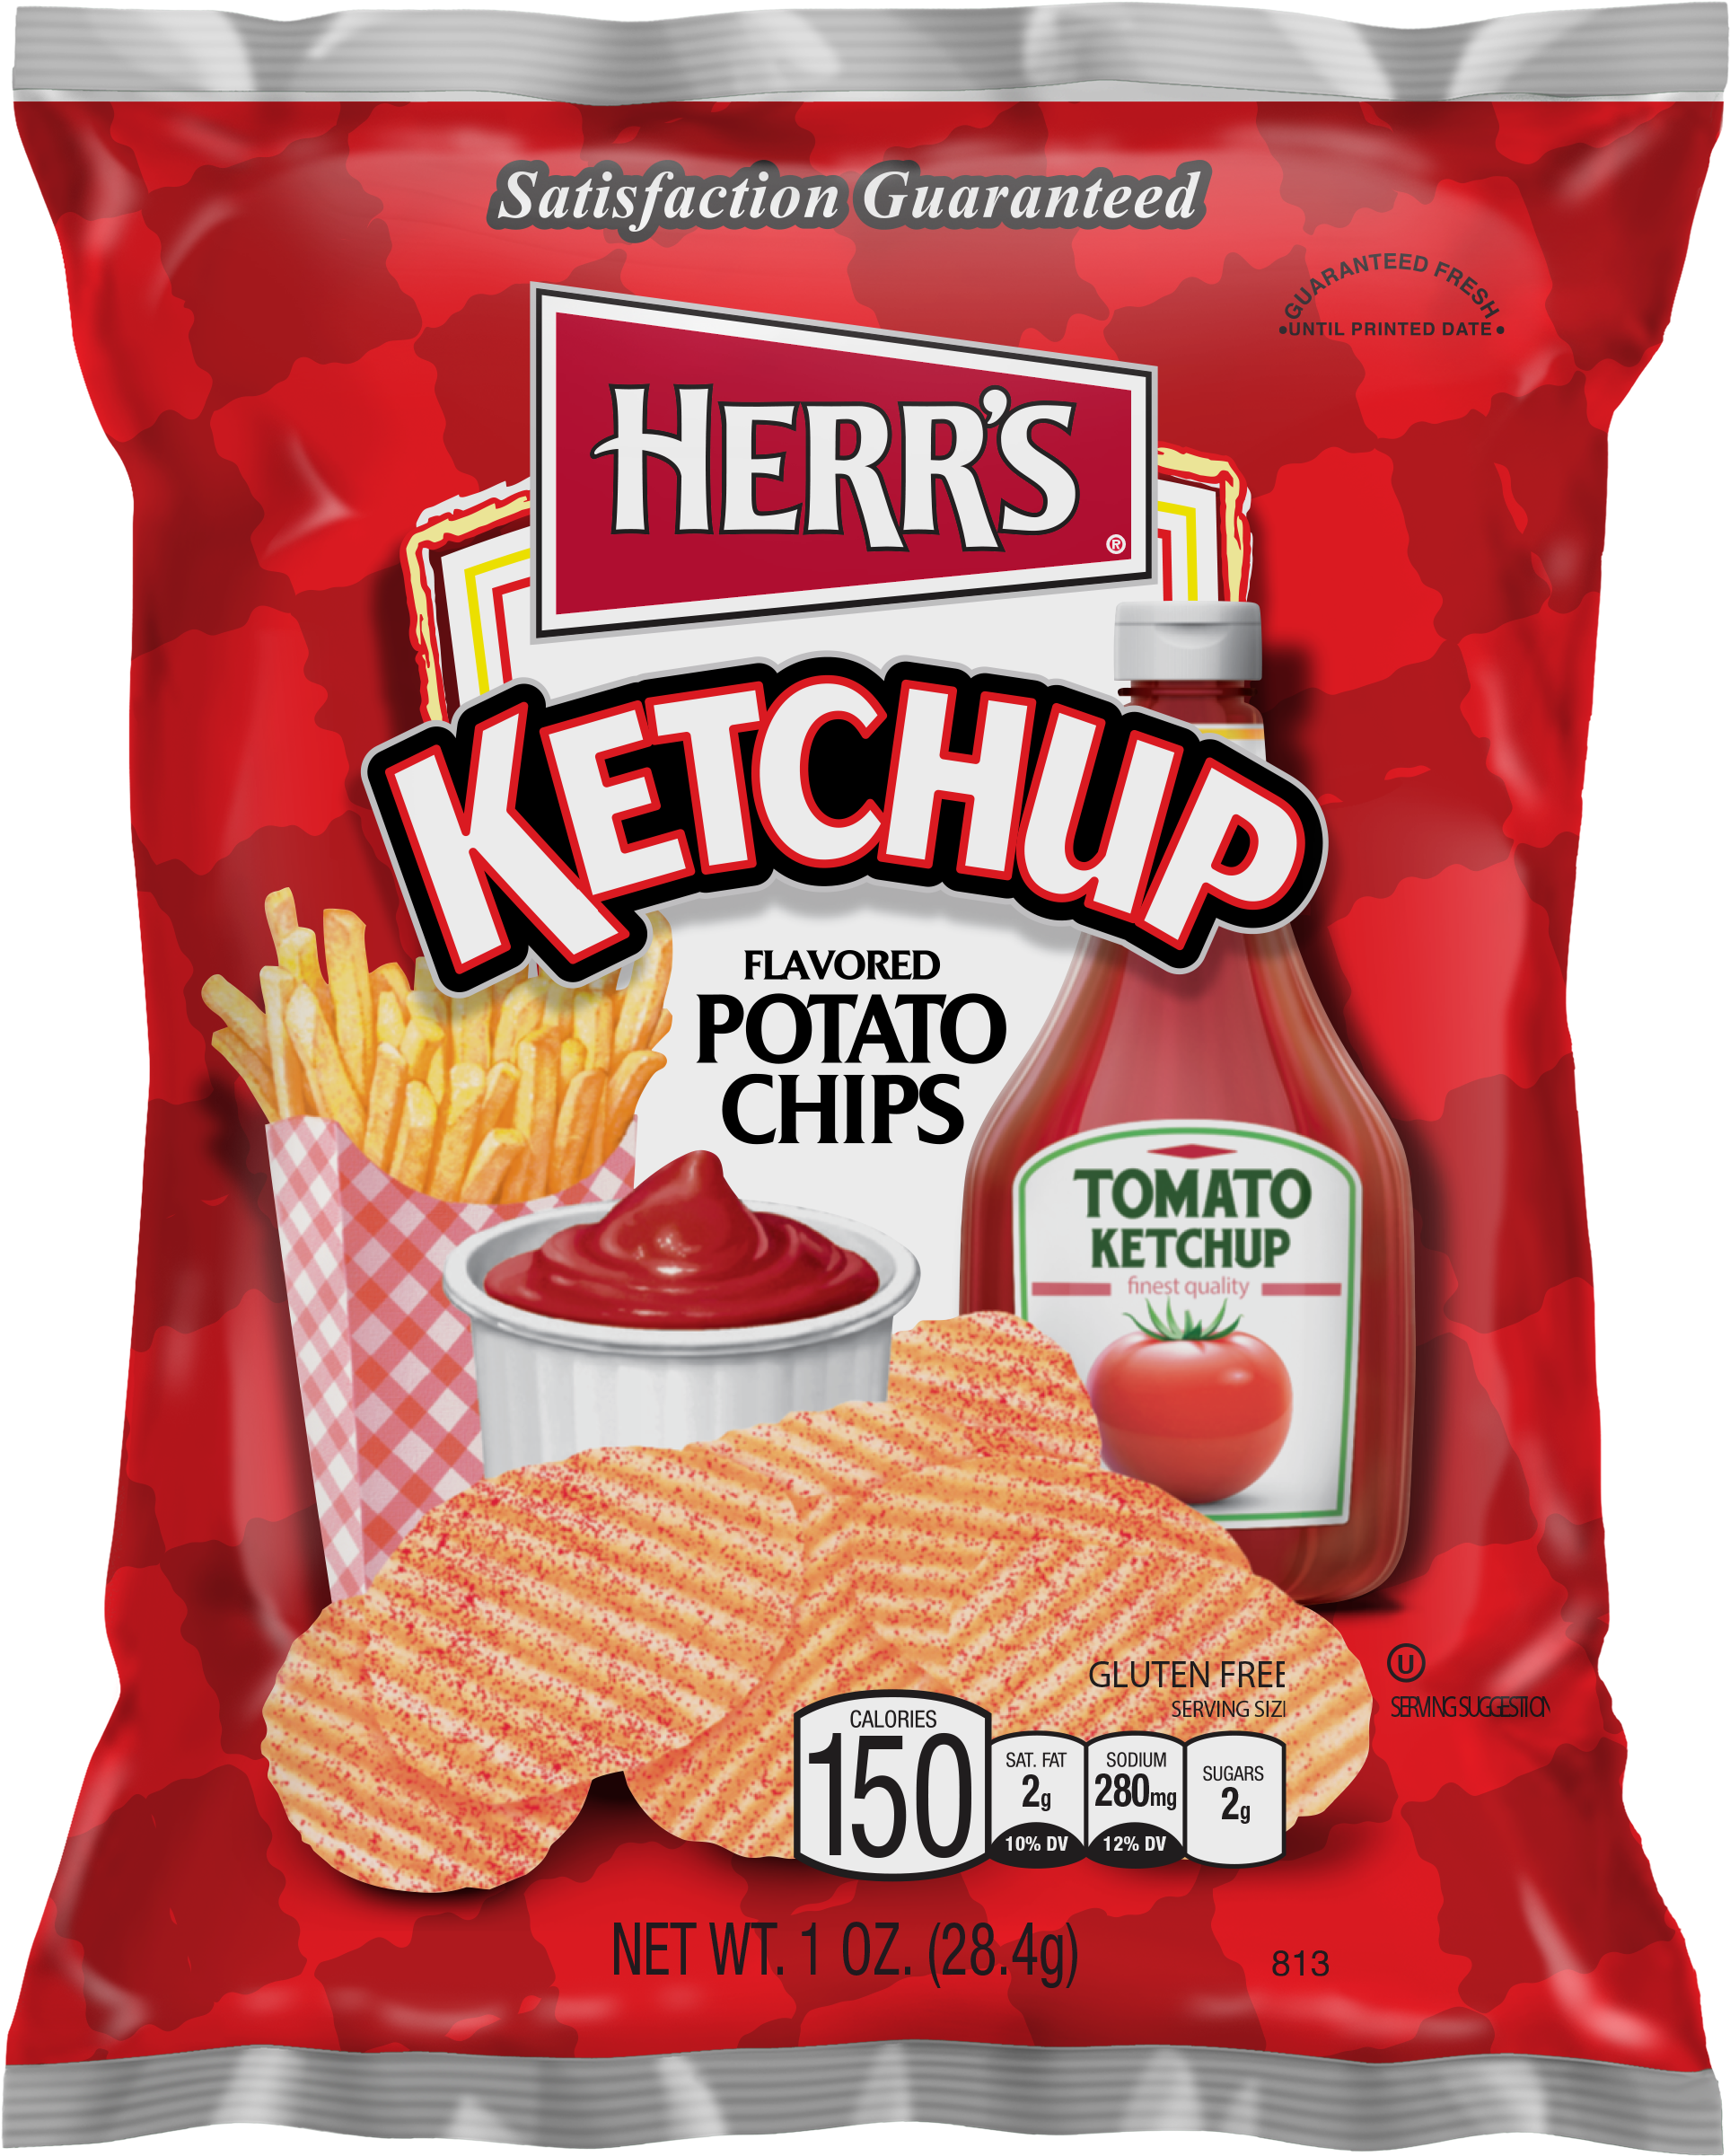 Herrs Ketchup Flavored Potato Chips Package PNG